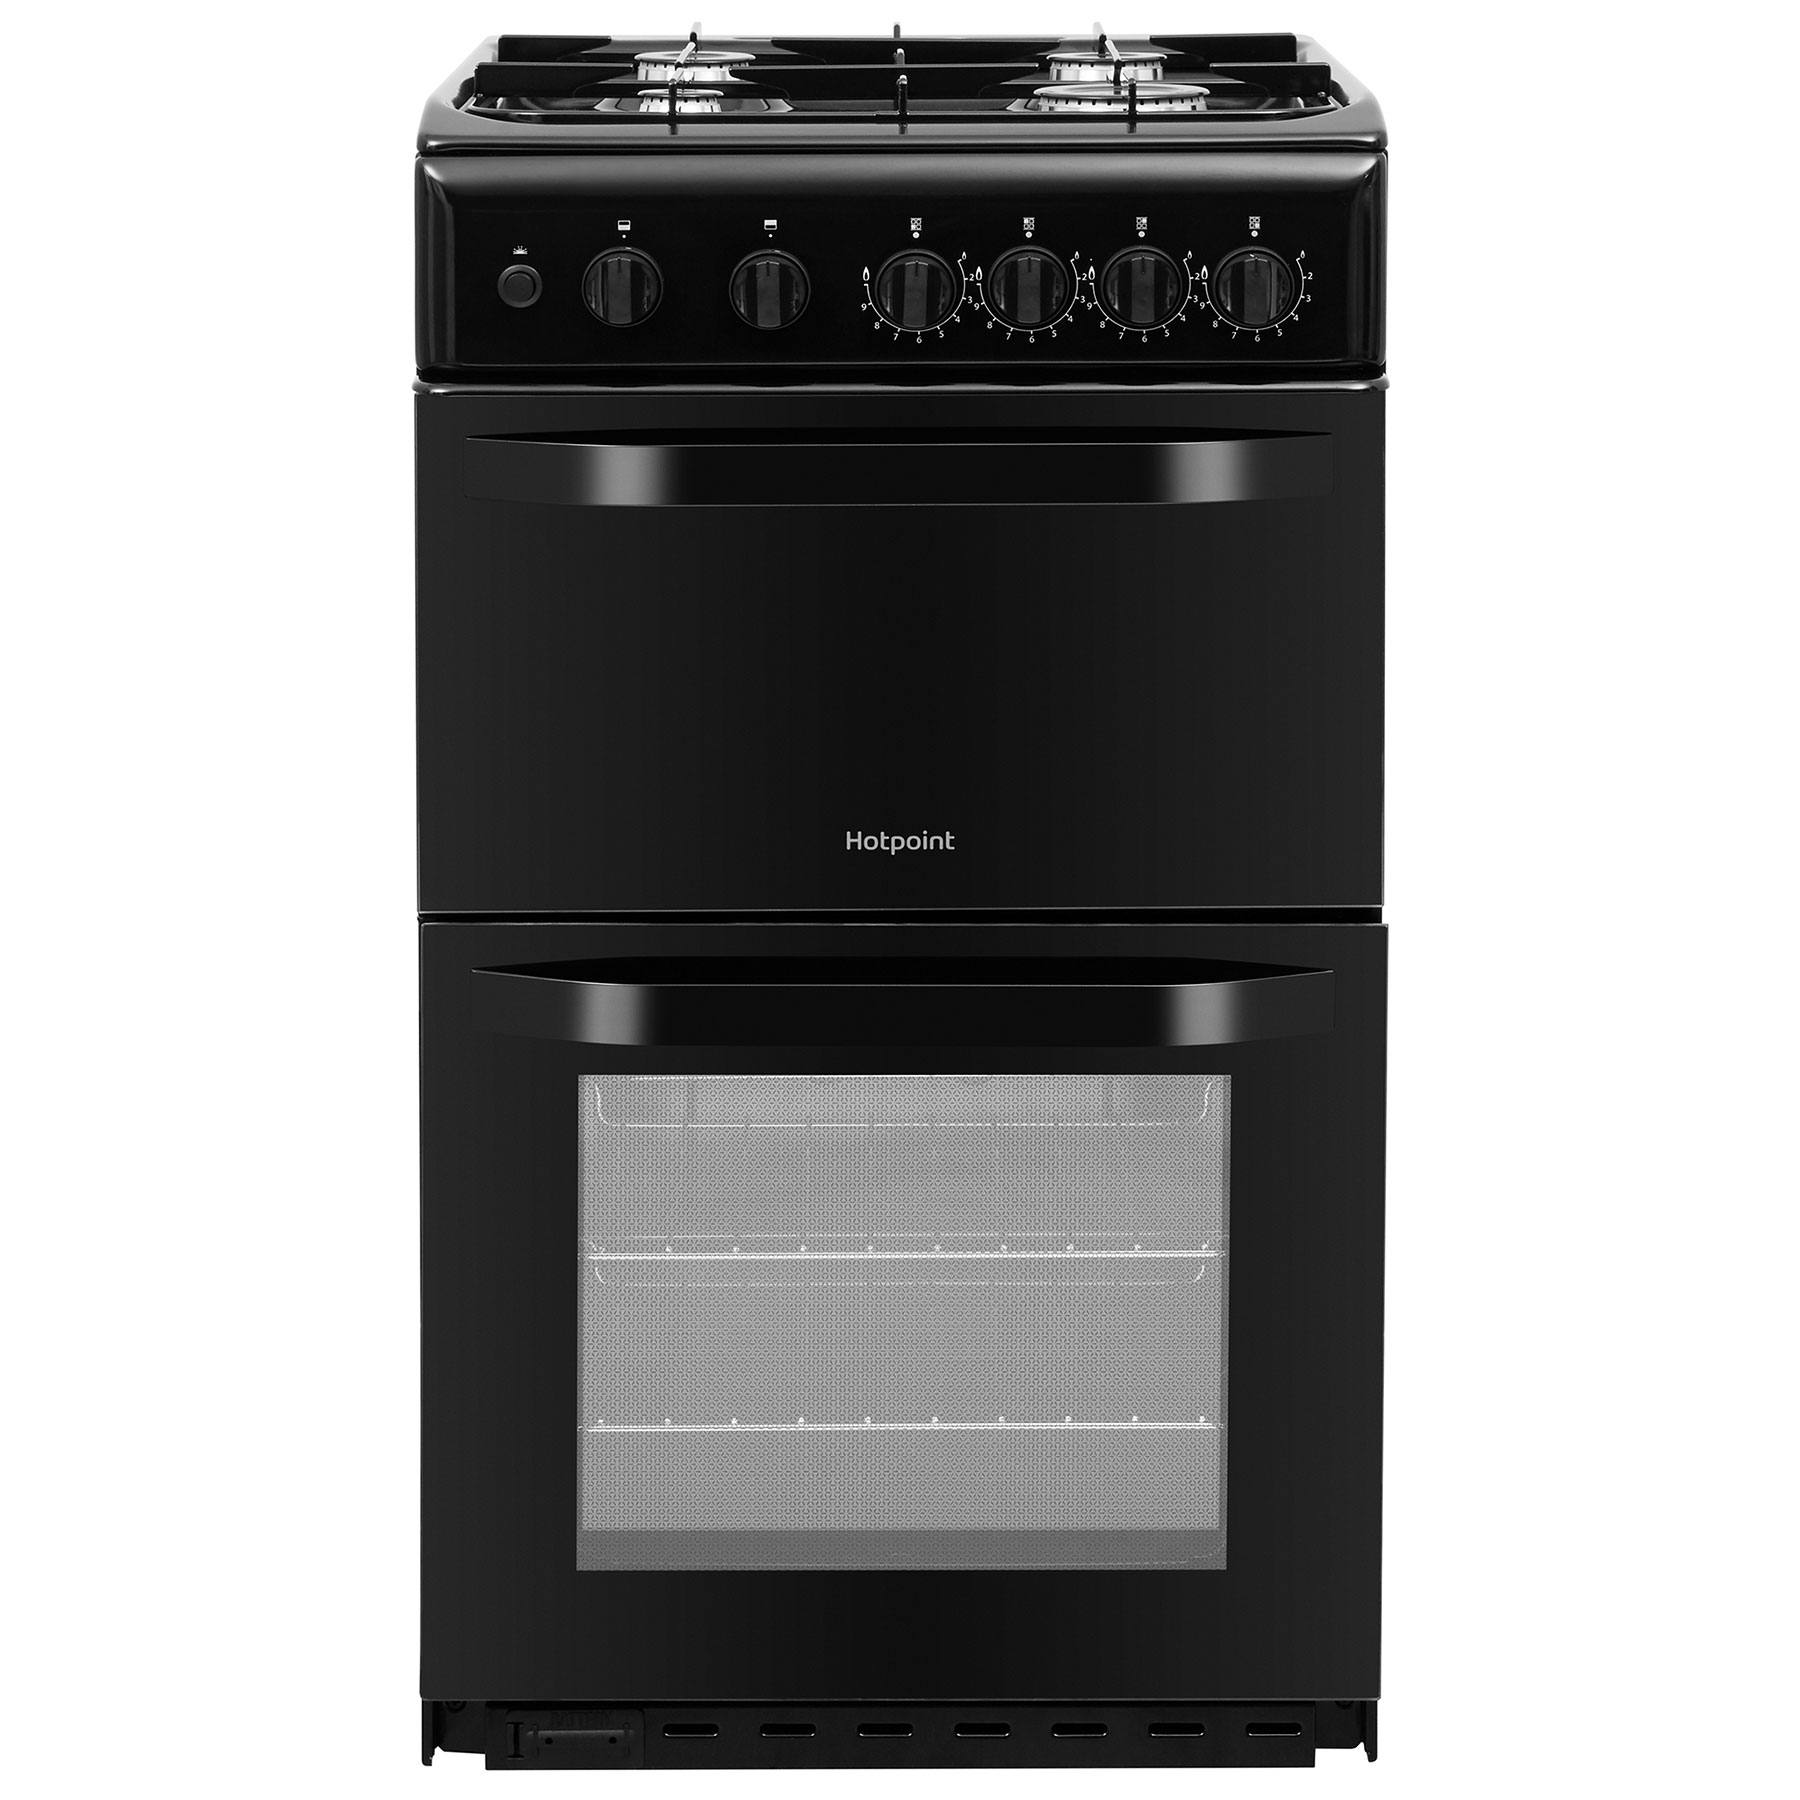 Image of Hotpoint HD5G00KCB 50cm Twin Cavity Gas Cooker in Black Catalytic Line